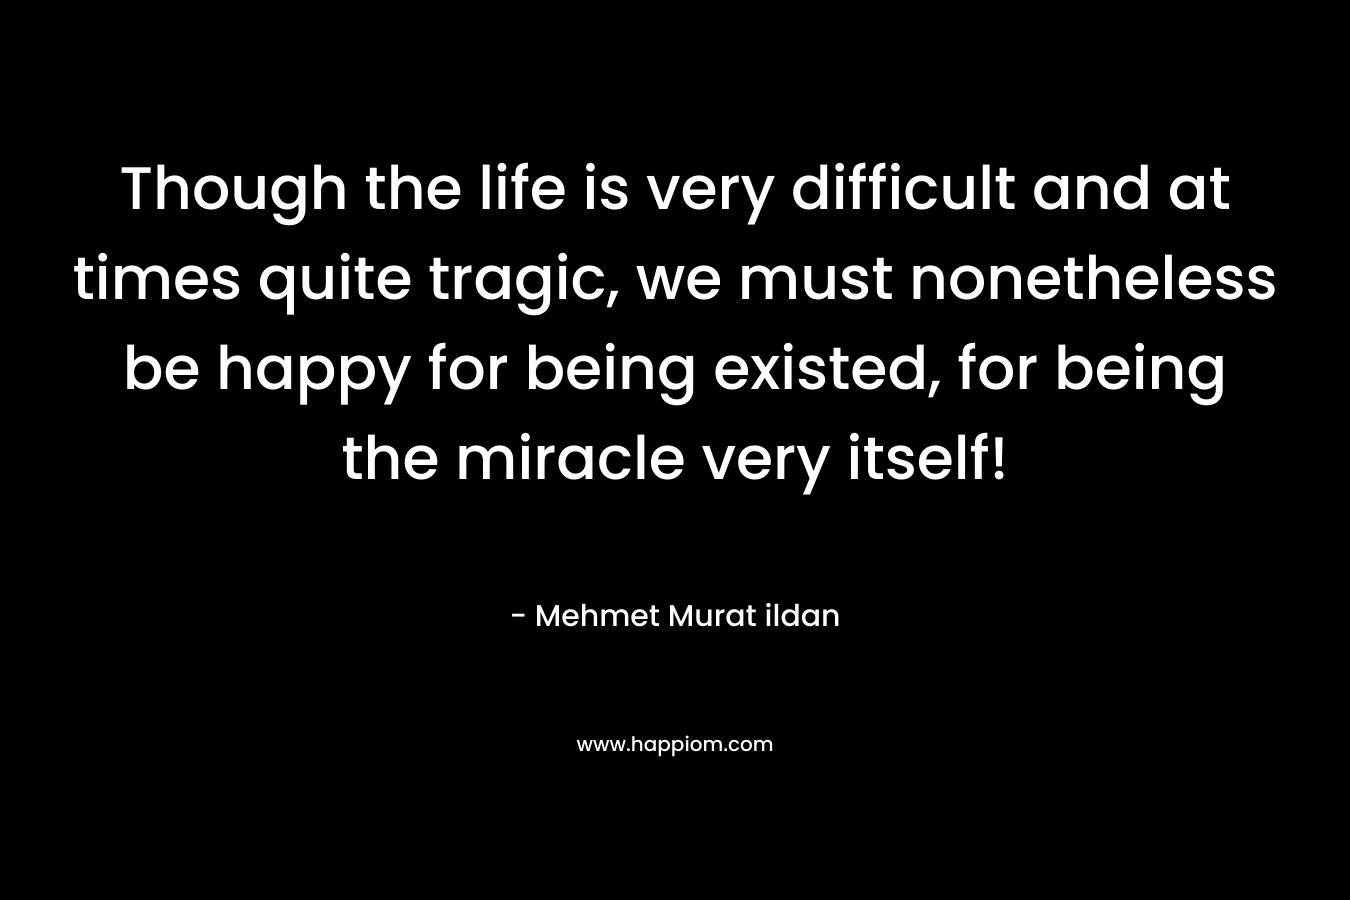 Though the life is very difficult and at times quite tragic, we must nonetheless be happy for being existed, for being the miracle very itself!